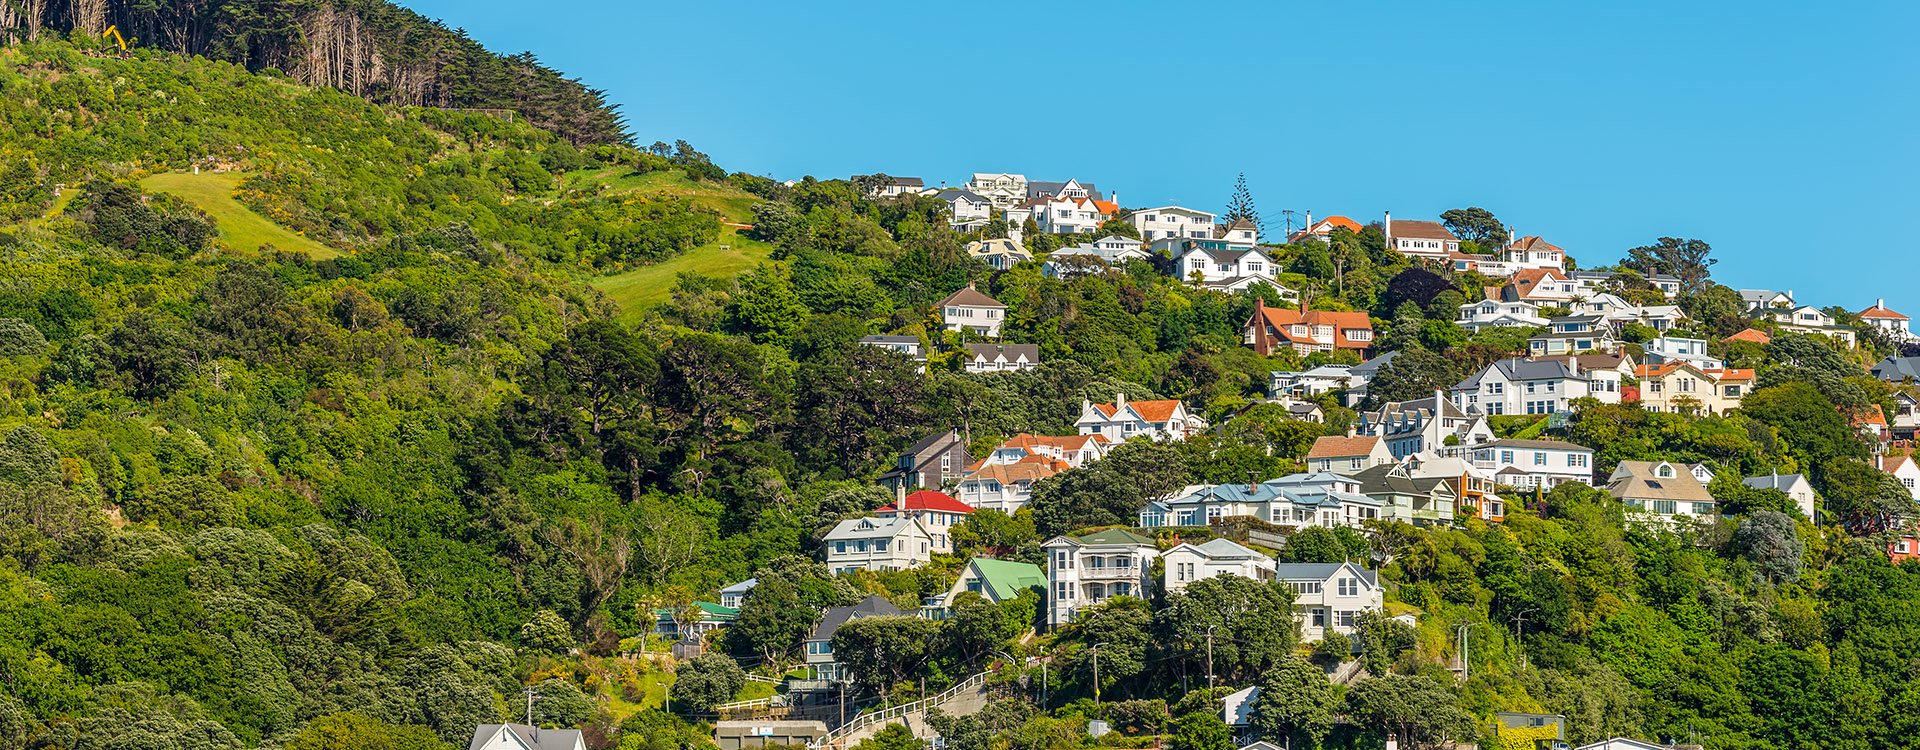 Colorful houses in Wellington, New Zealand. Wellington is the capital city, New Zealand